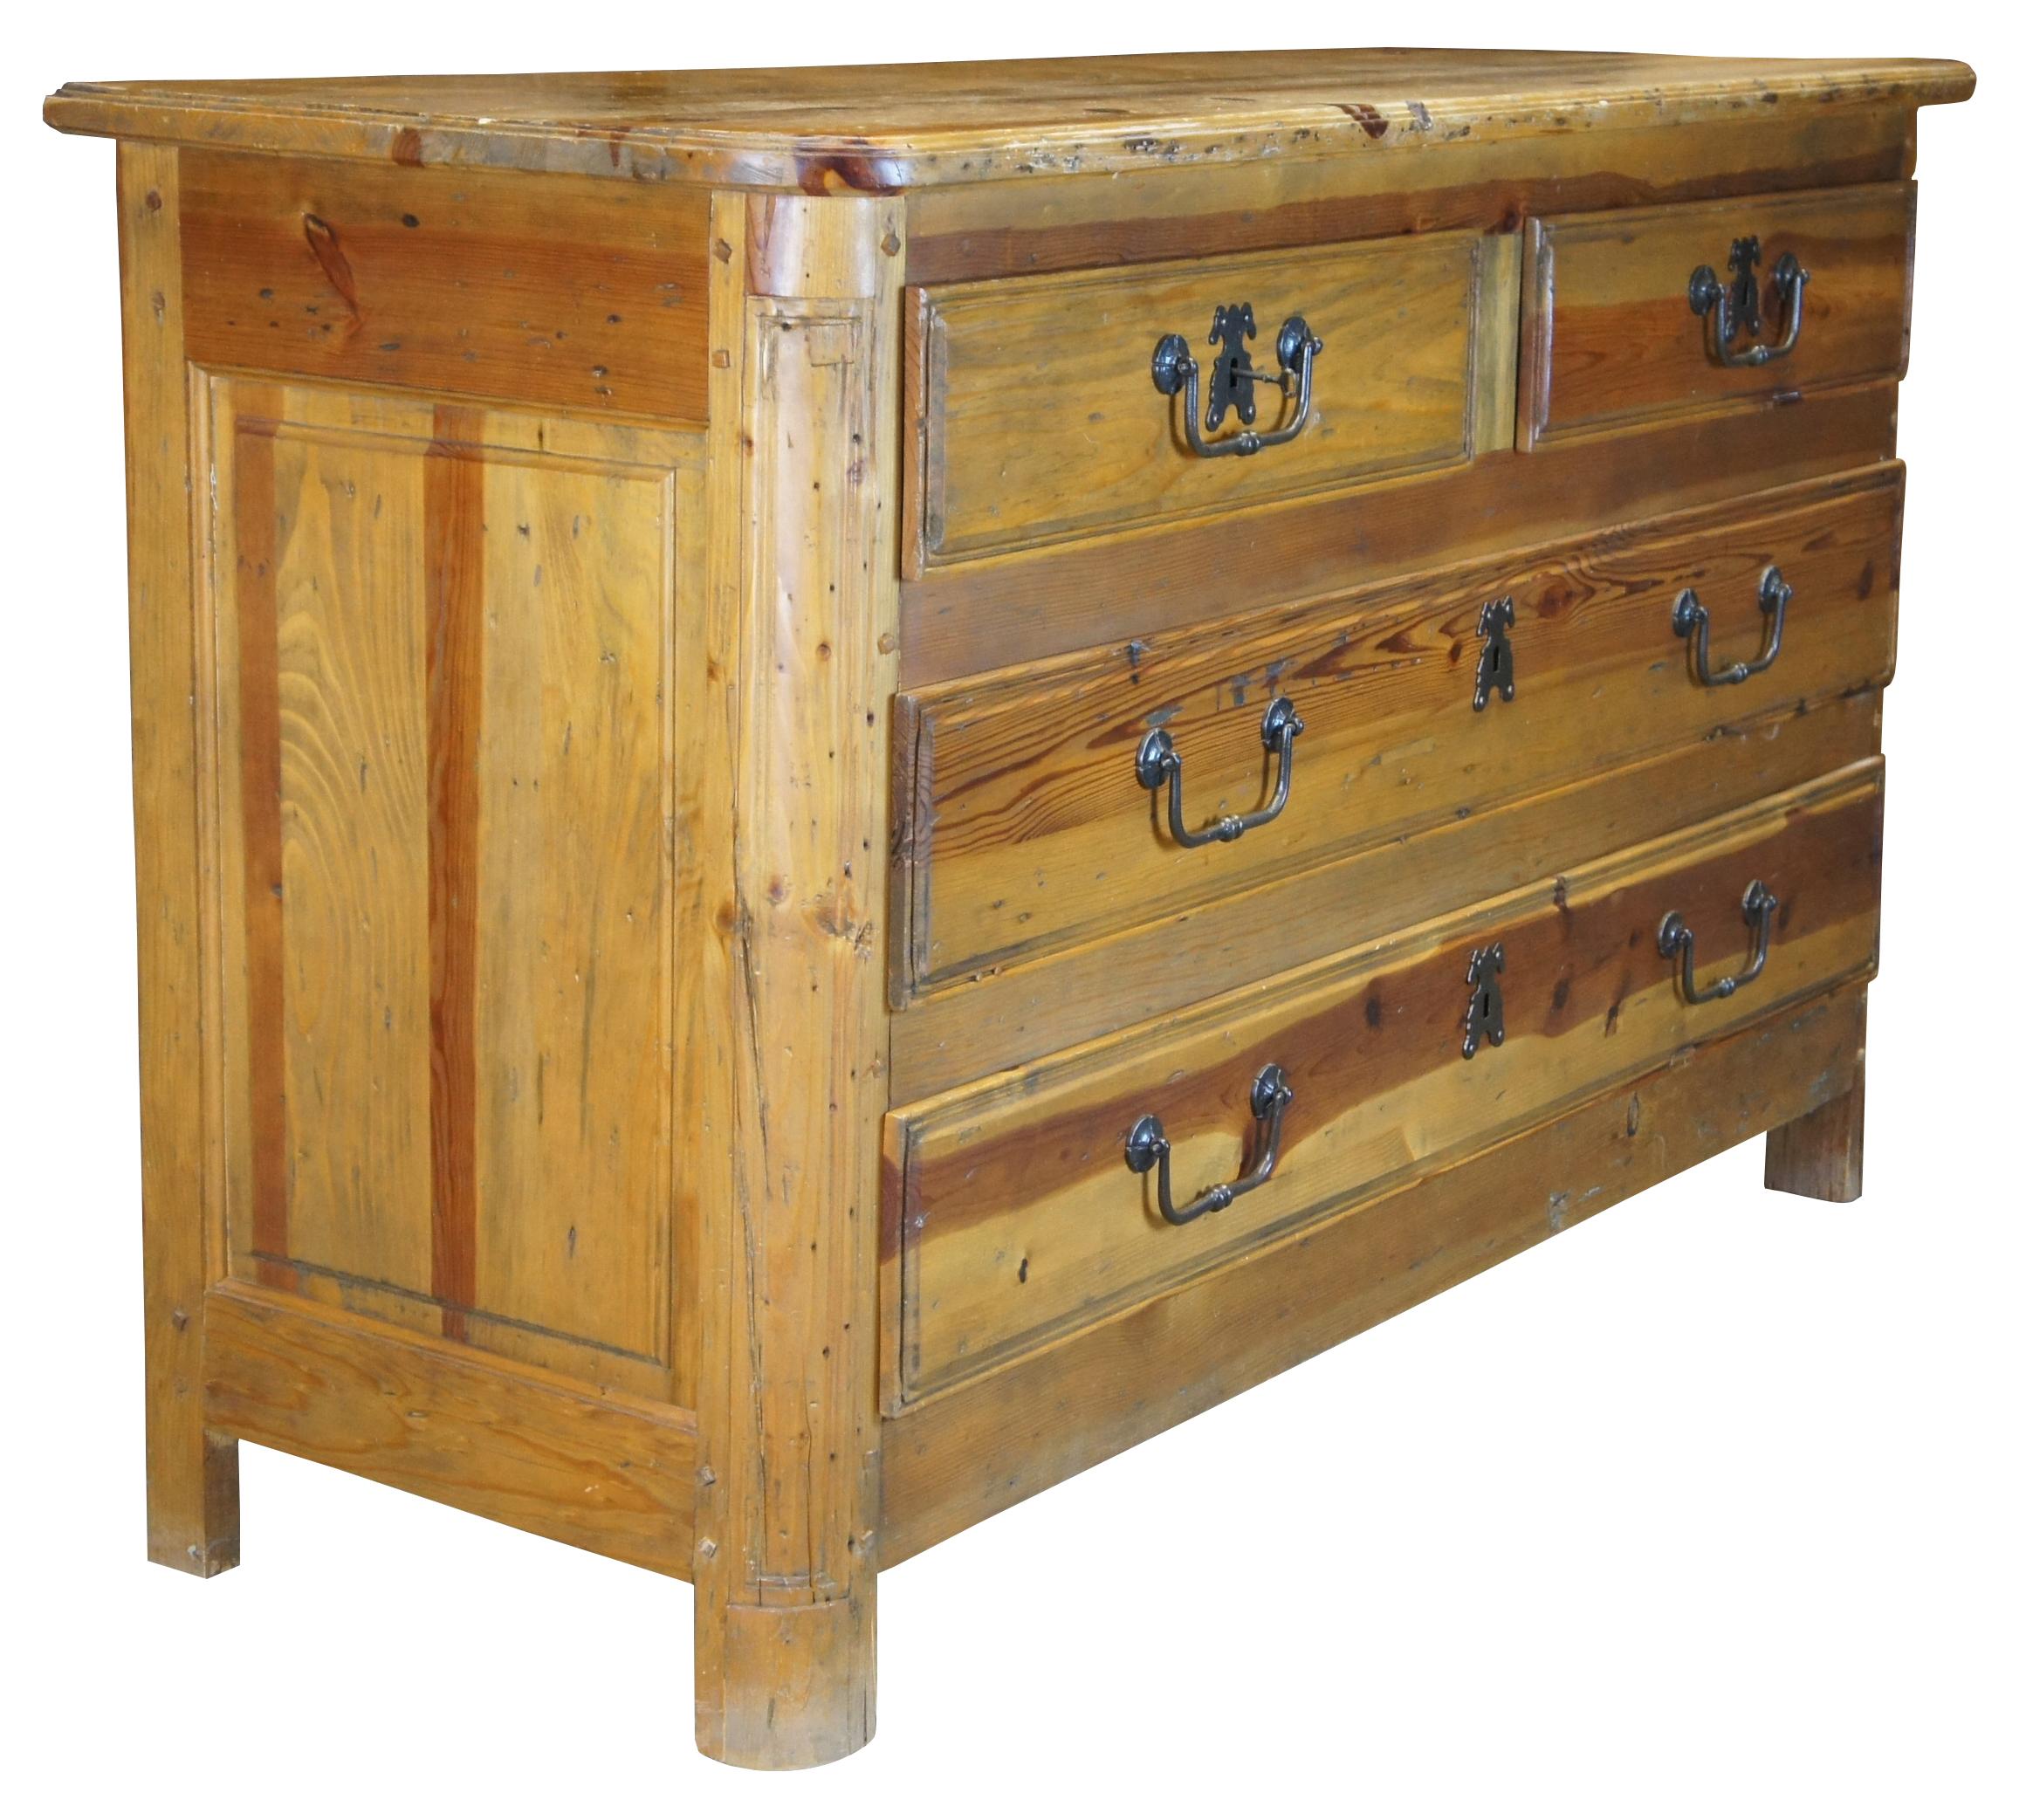 Ralph Lauren Estate Chest, circa 1990s. Made from naturally distressed solid rustic pine with an old world feel. An oversized stately rectangular form with a 2 over 2 drawer design. Each drawer is dovetailed and features classic colonial bale drawer